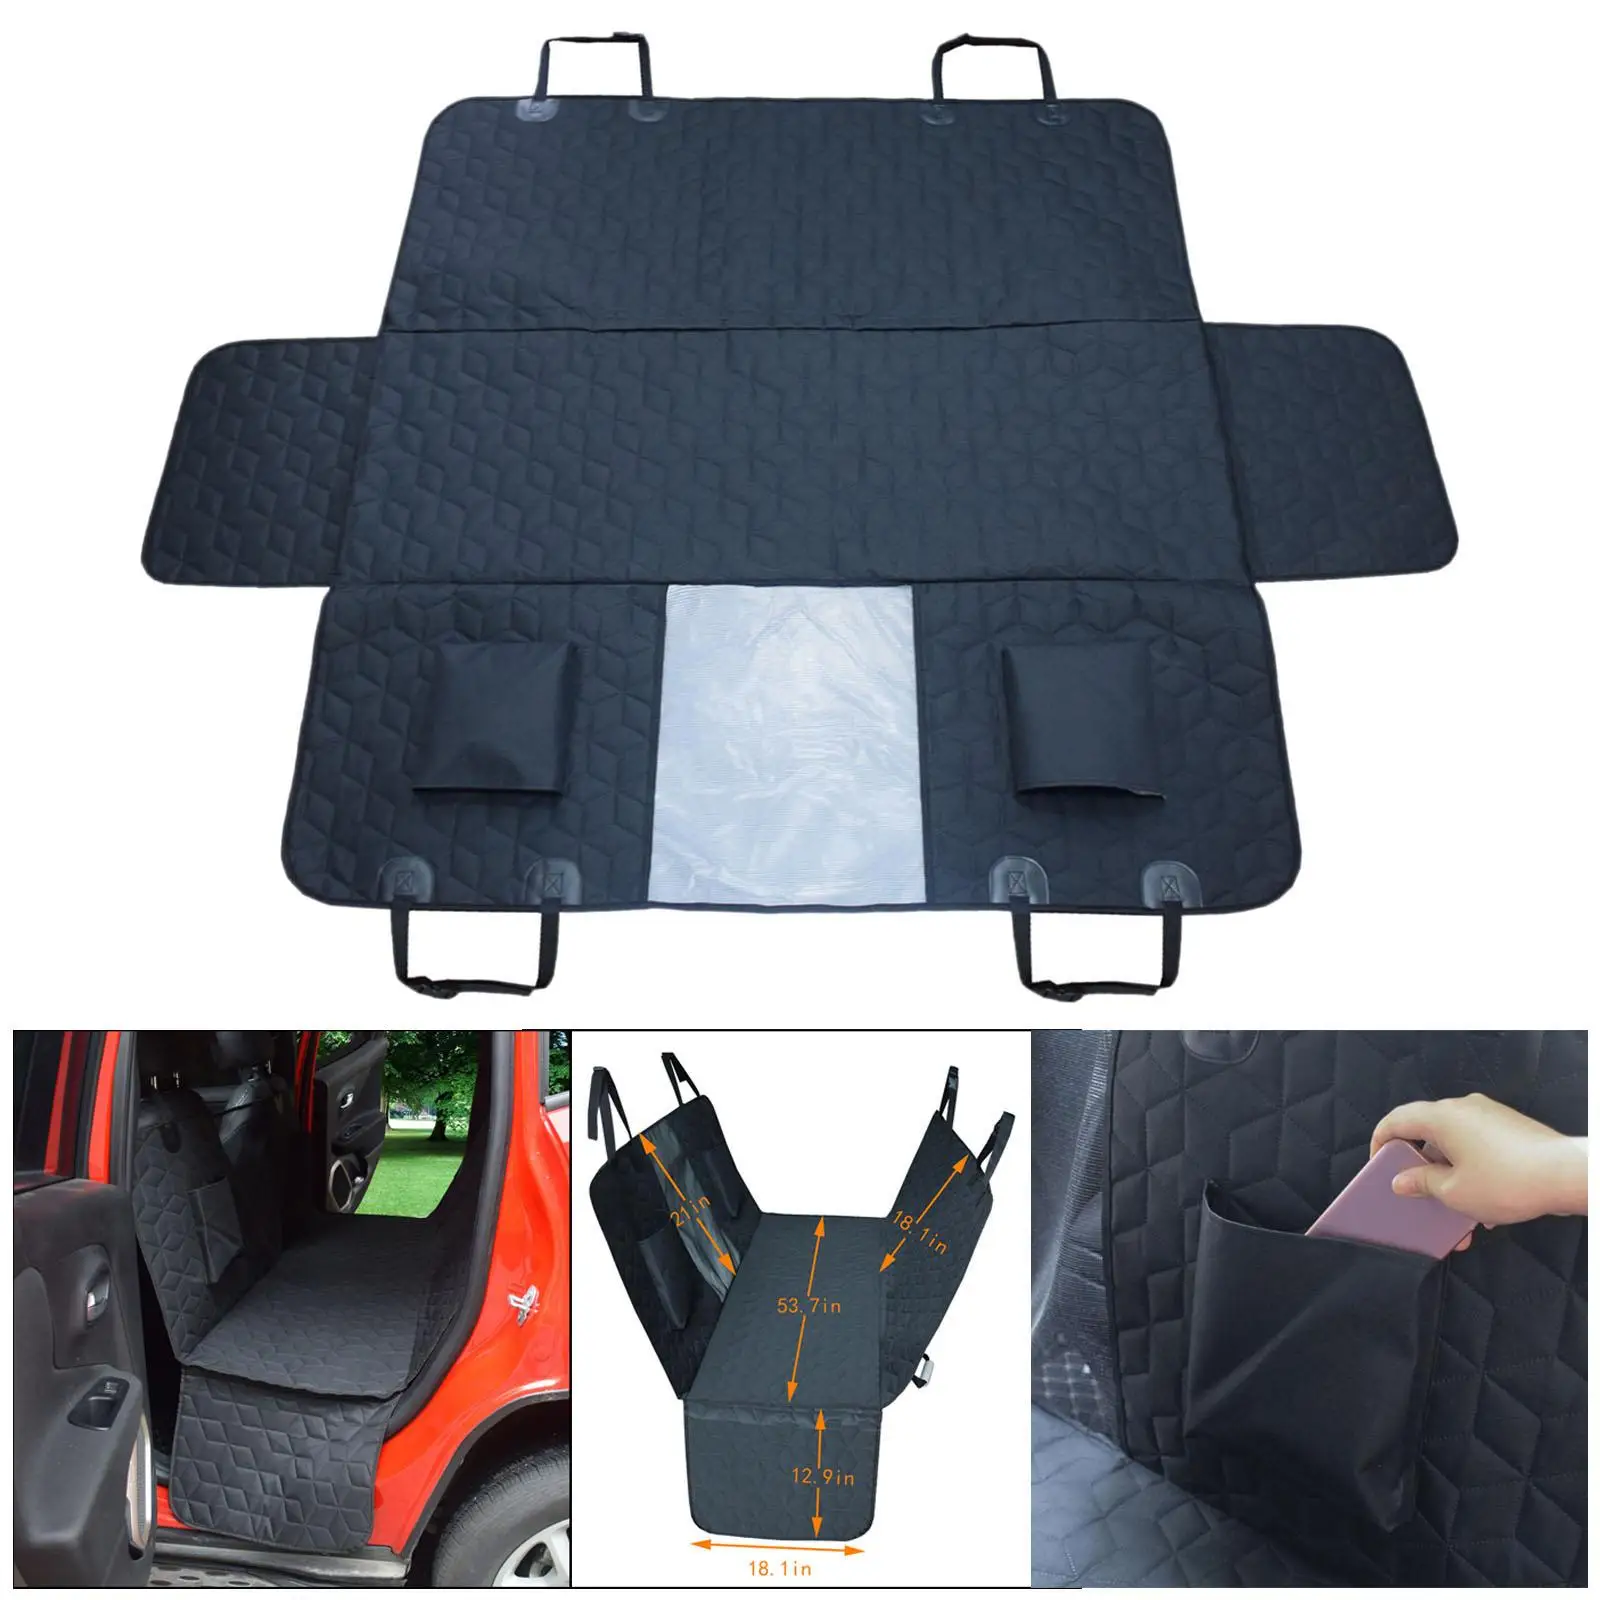 Dog Car Seat Covers Antinslip Anti-Scratch with Mesh Window Dog Hammock Back Seat Cover Protector 600D Durable Pet Seat Cover